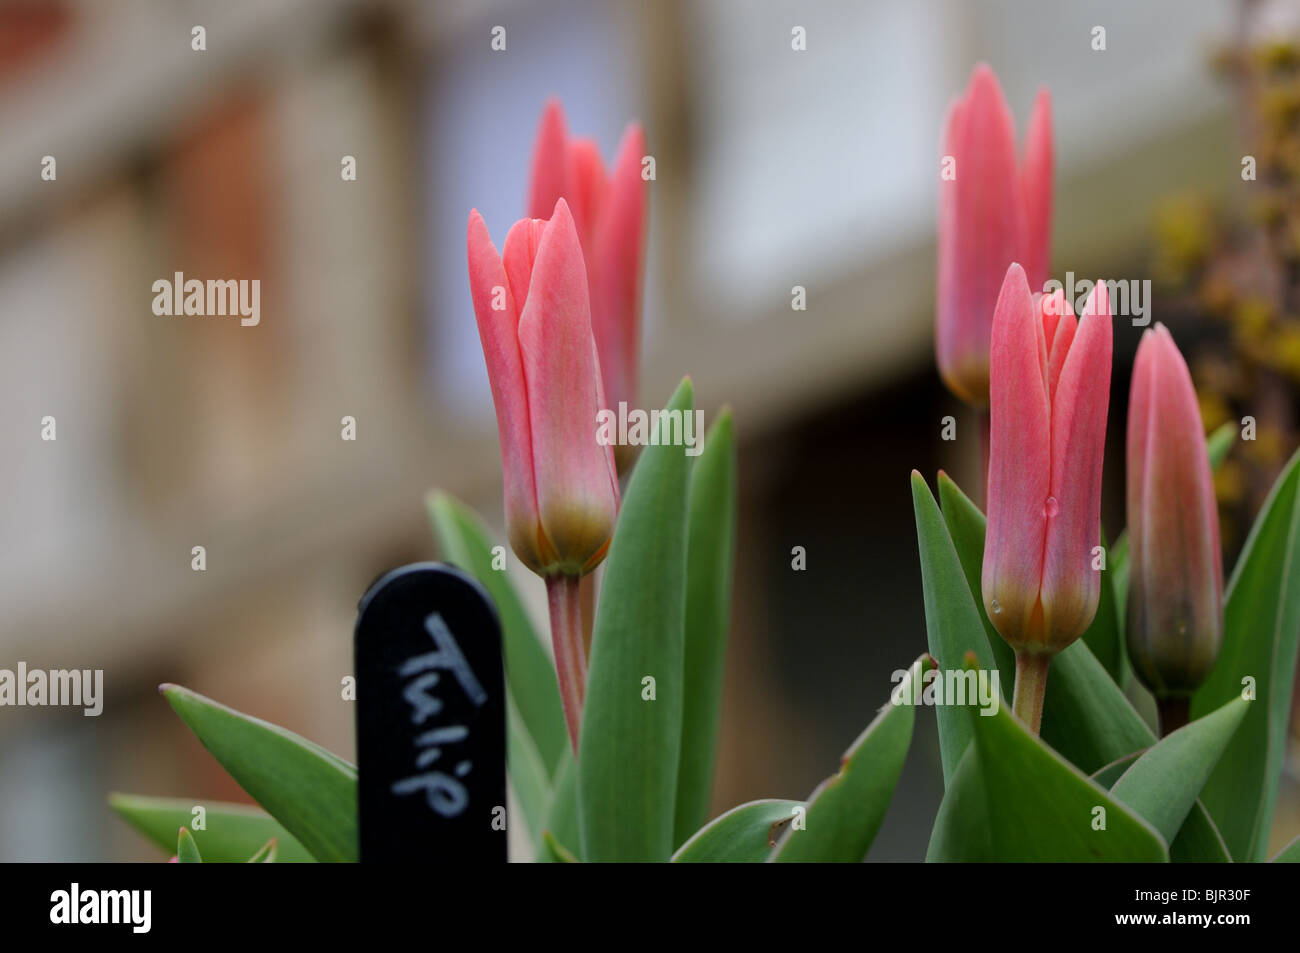 Labelled tulips ('jeantine') Stock Photo